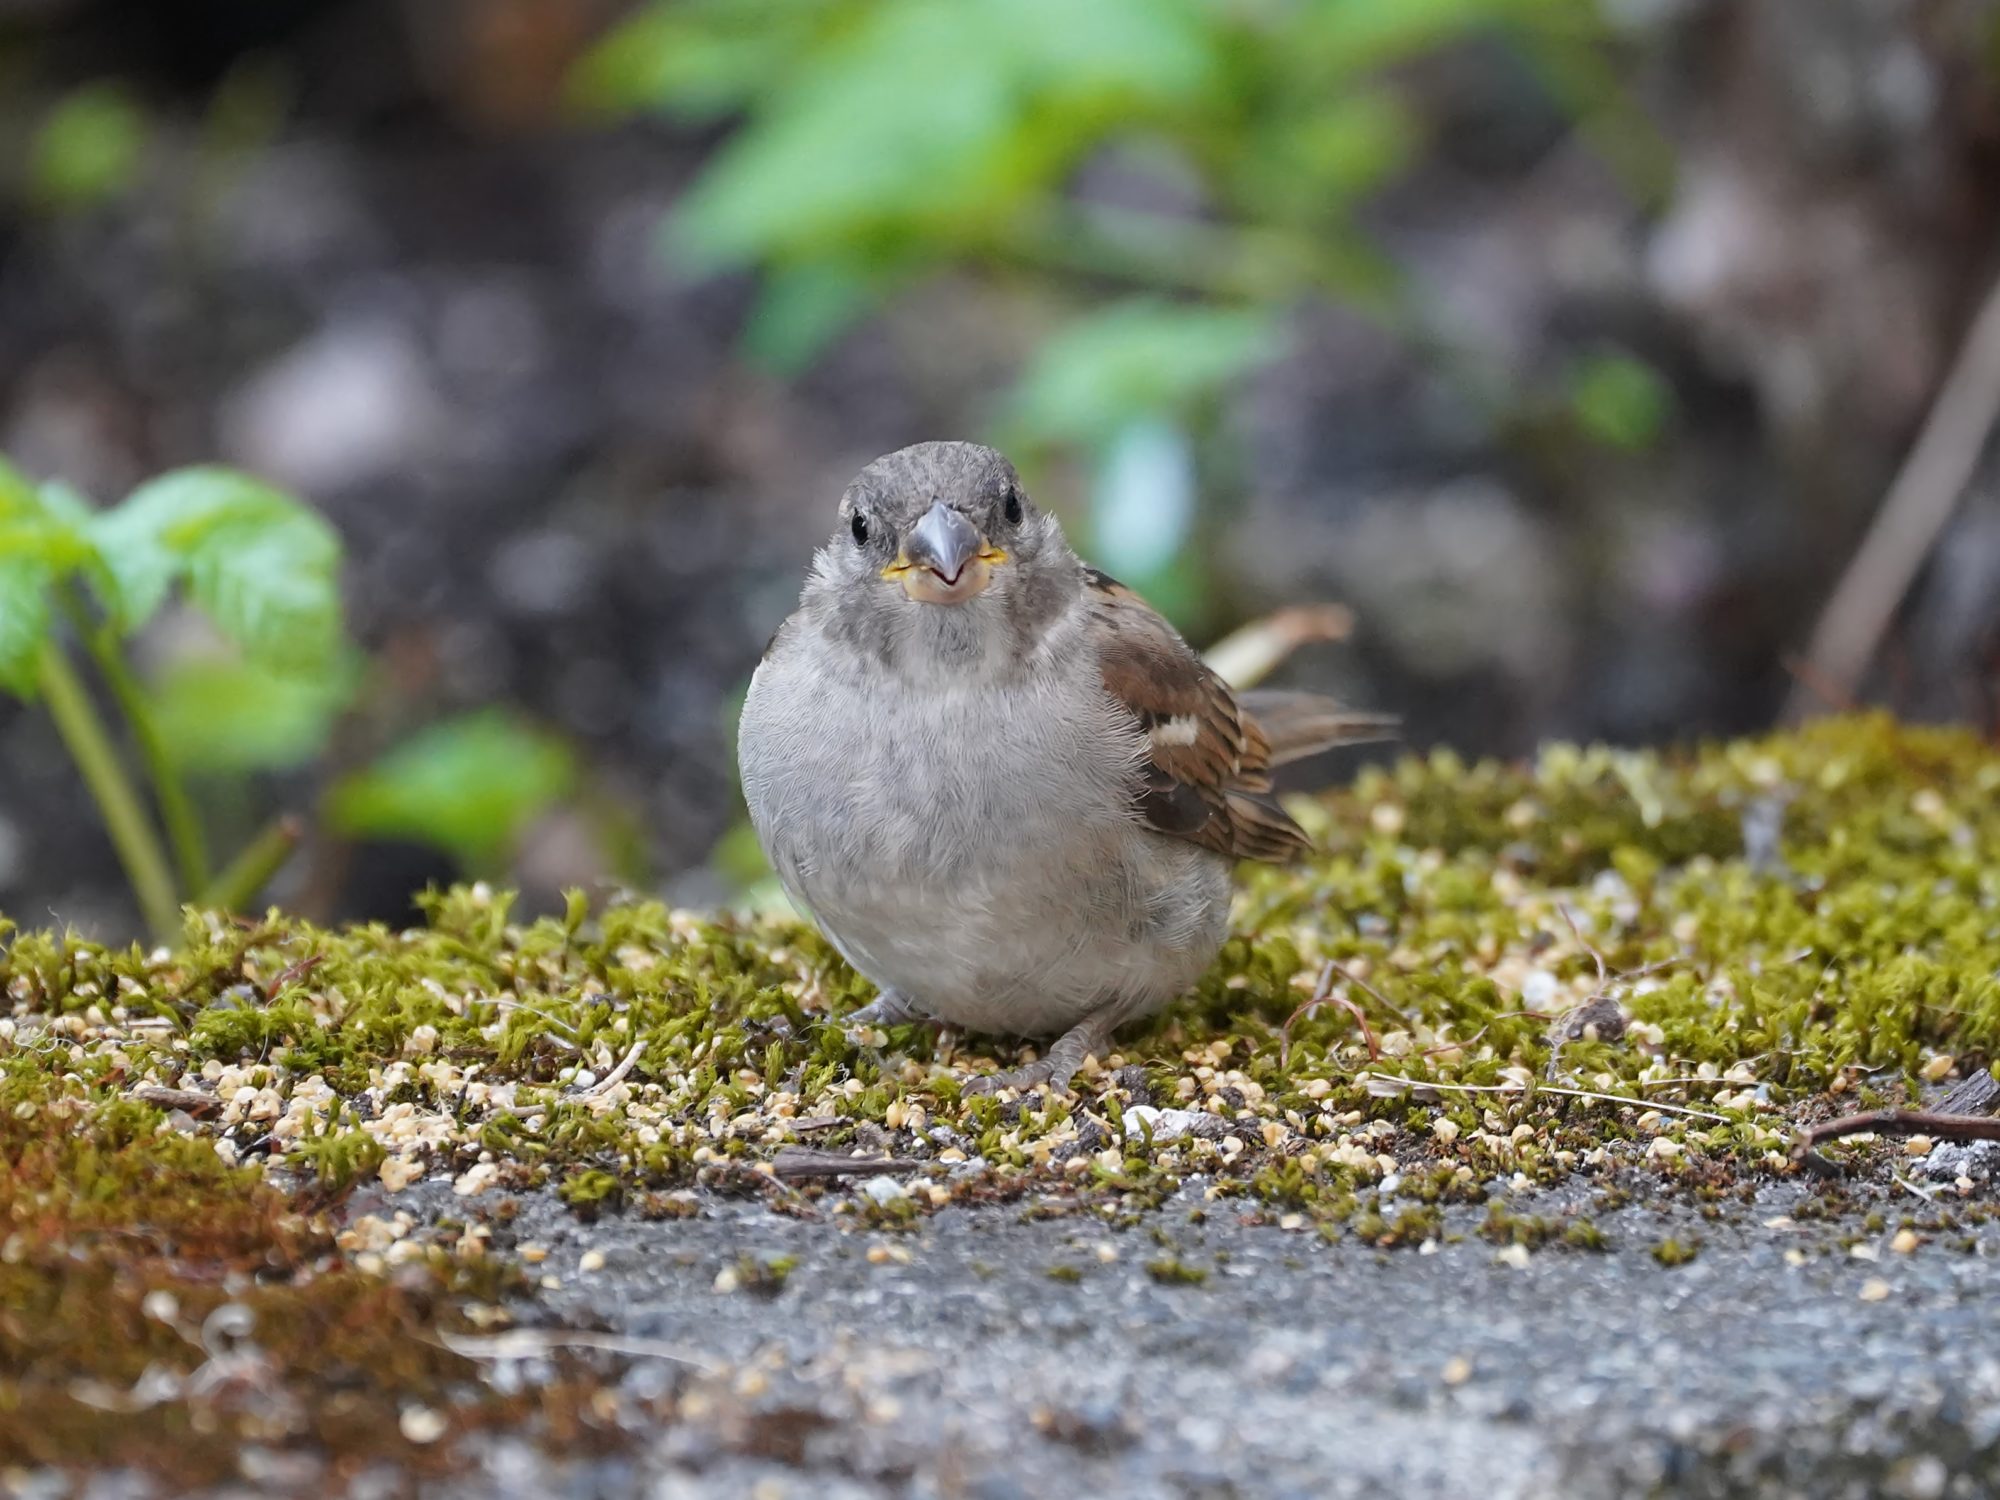 A female or immature House Sparrow on a little patch of moss, looking straight at me